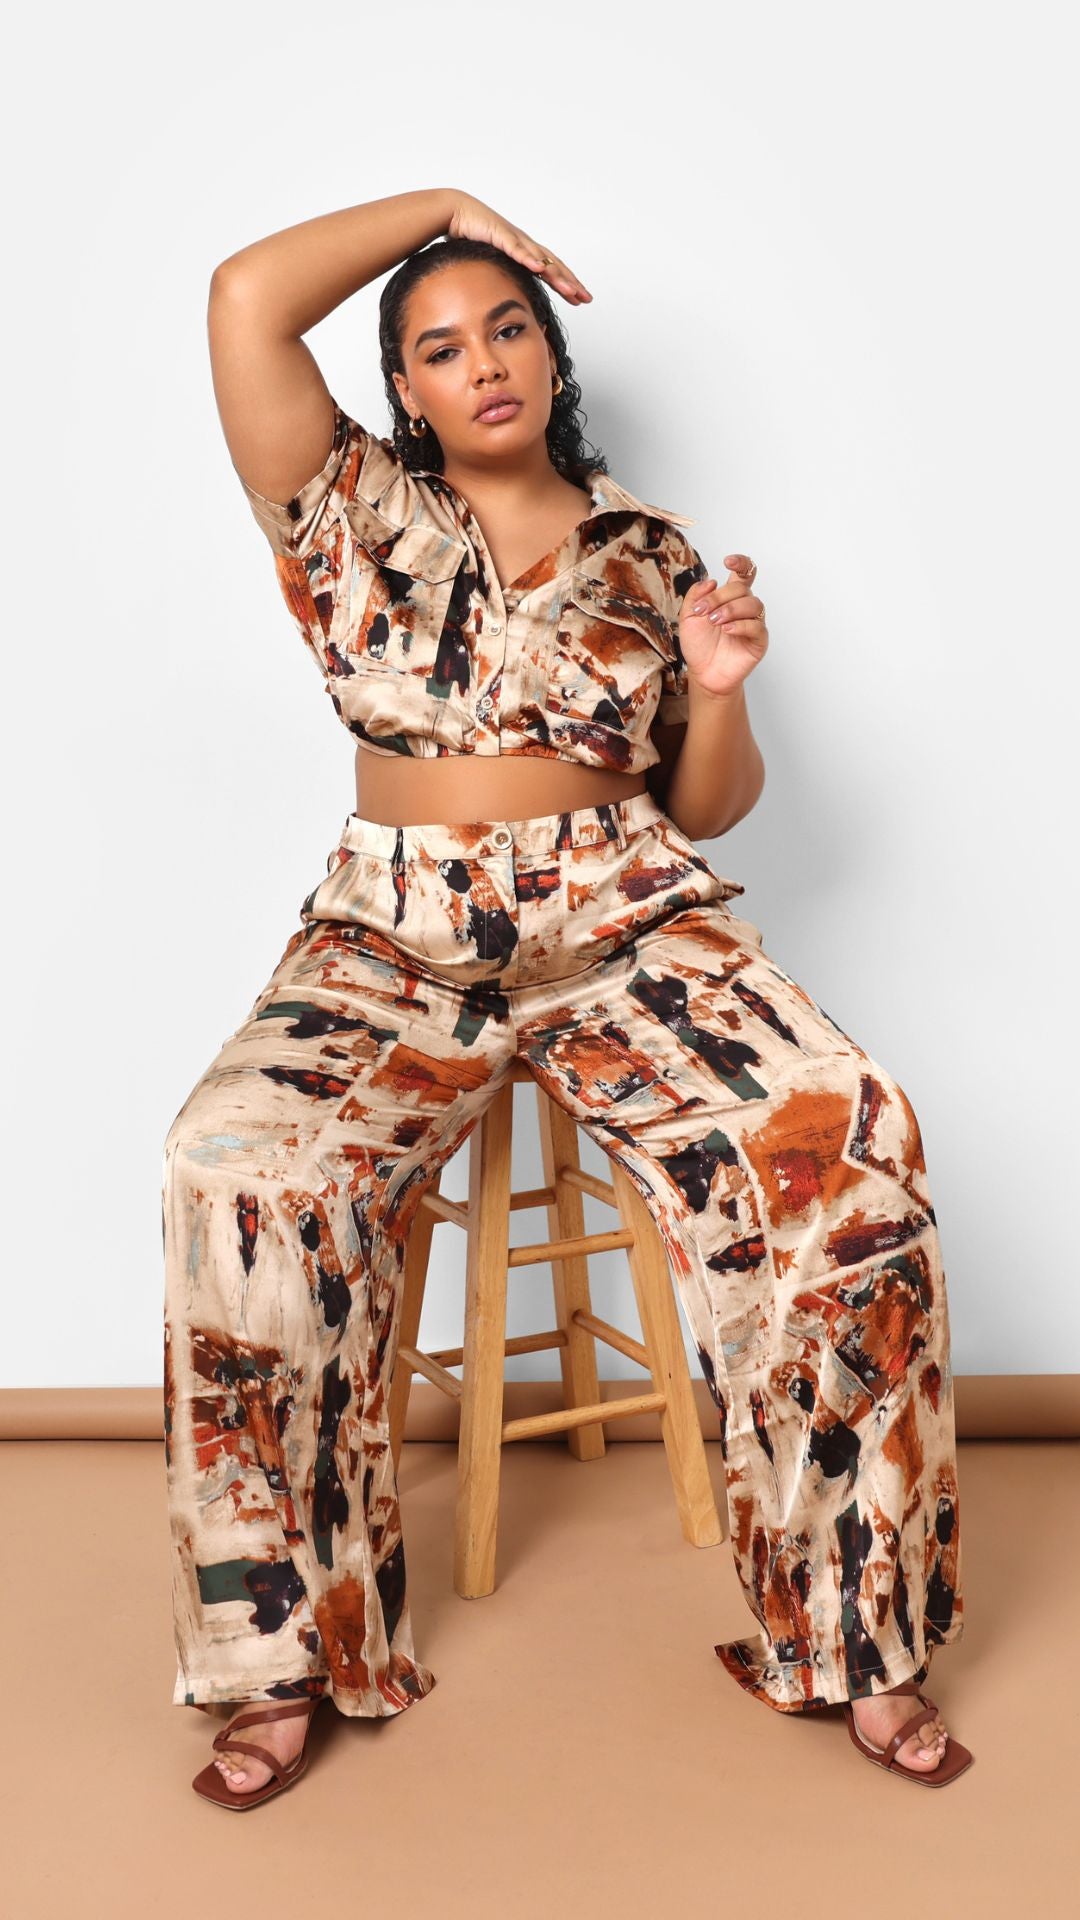 Trending Wholesale plus size palazzo pants suits At Affordable Prices –